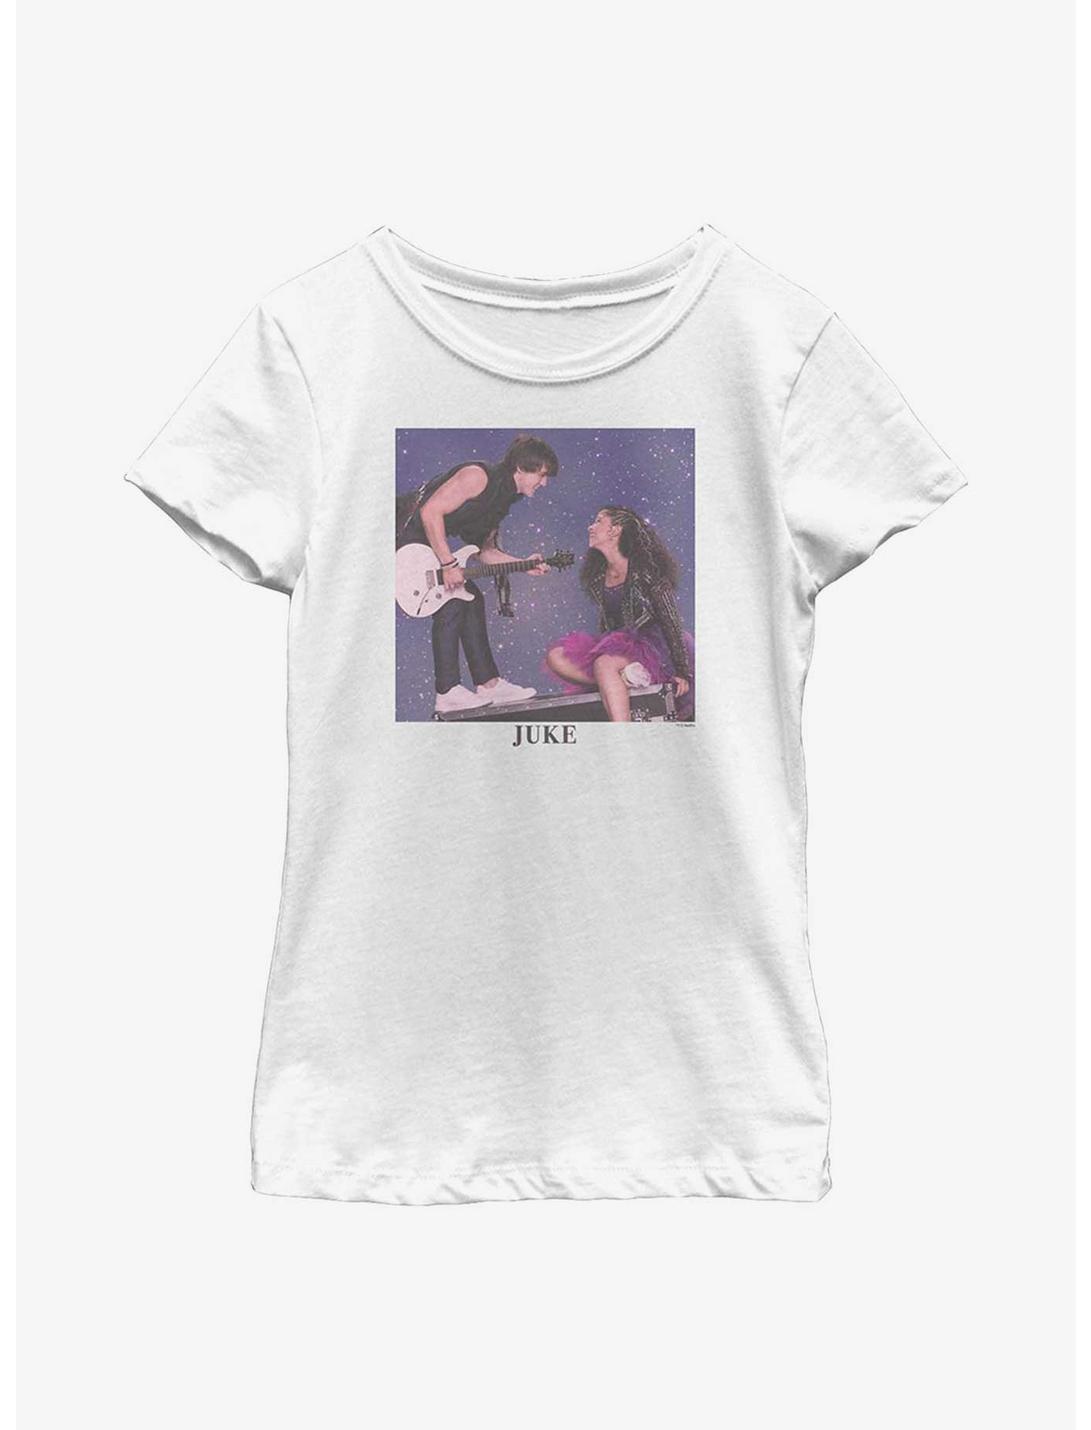 Julie And The Phantoms And Luke Youth Girls T-Shirt, WHITE, hi-res